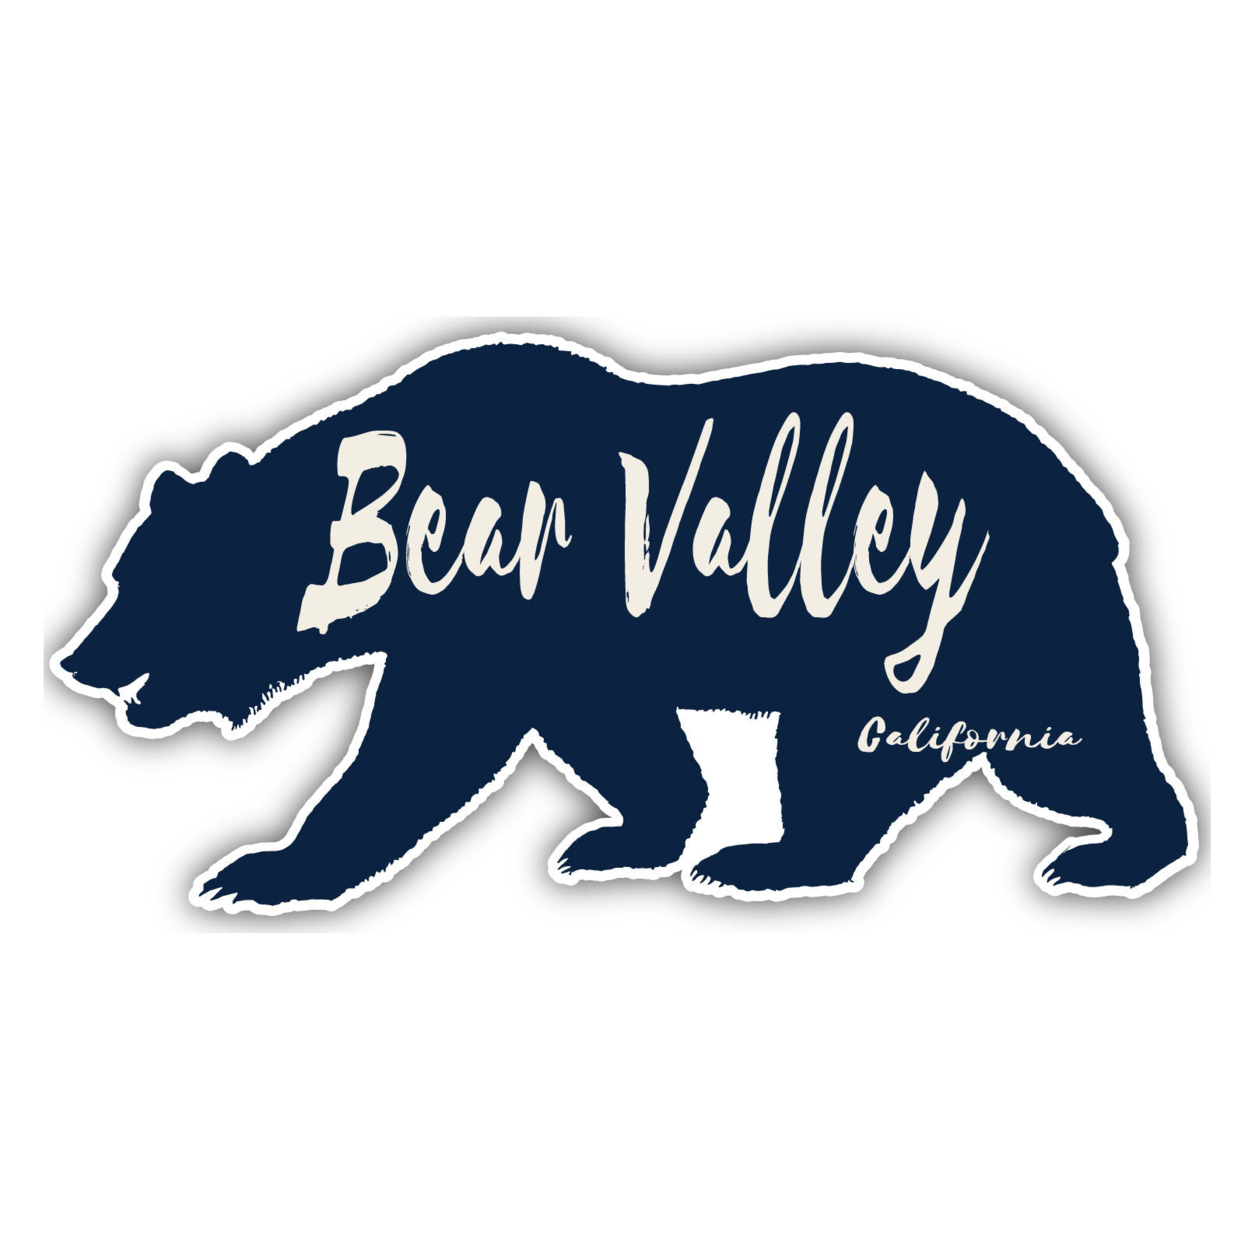 Bear Valley California Souvenir Decorative Stickers (Choose Theme And Size) - 4-Pack, 12-Inch, Bear